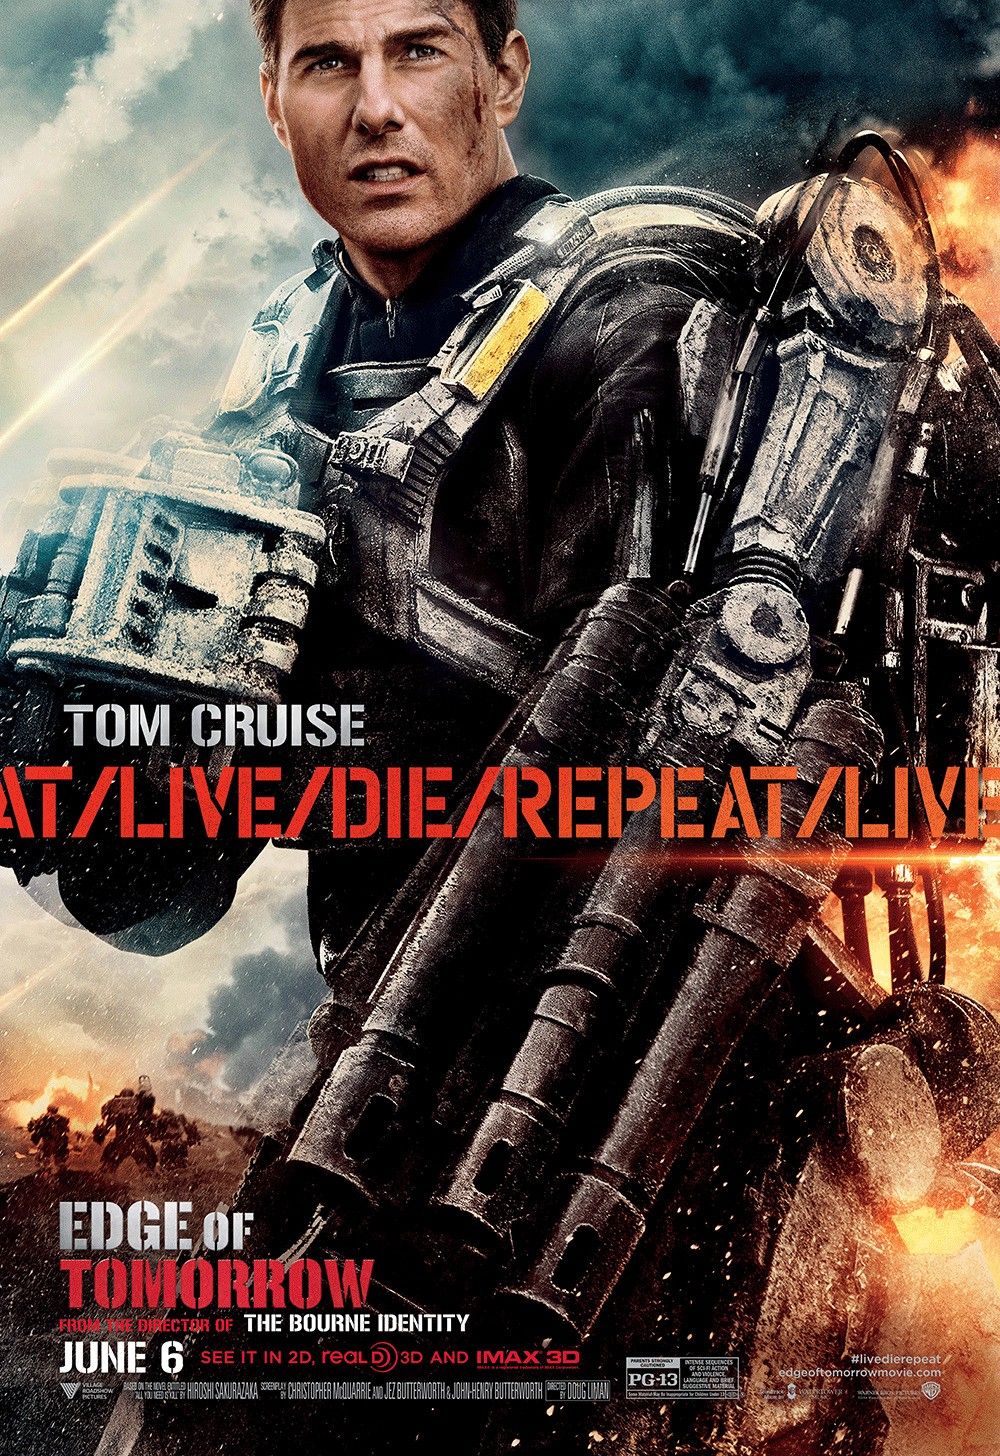 New Edge of Tomorrow poster, Live, Die, Repeat.